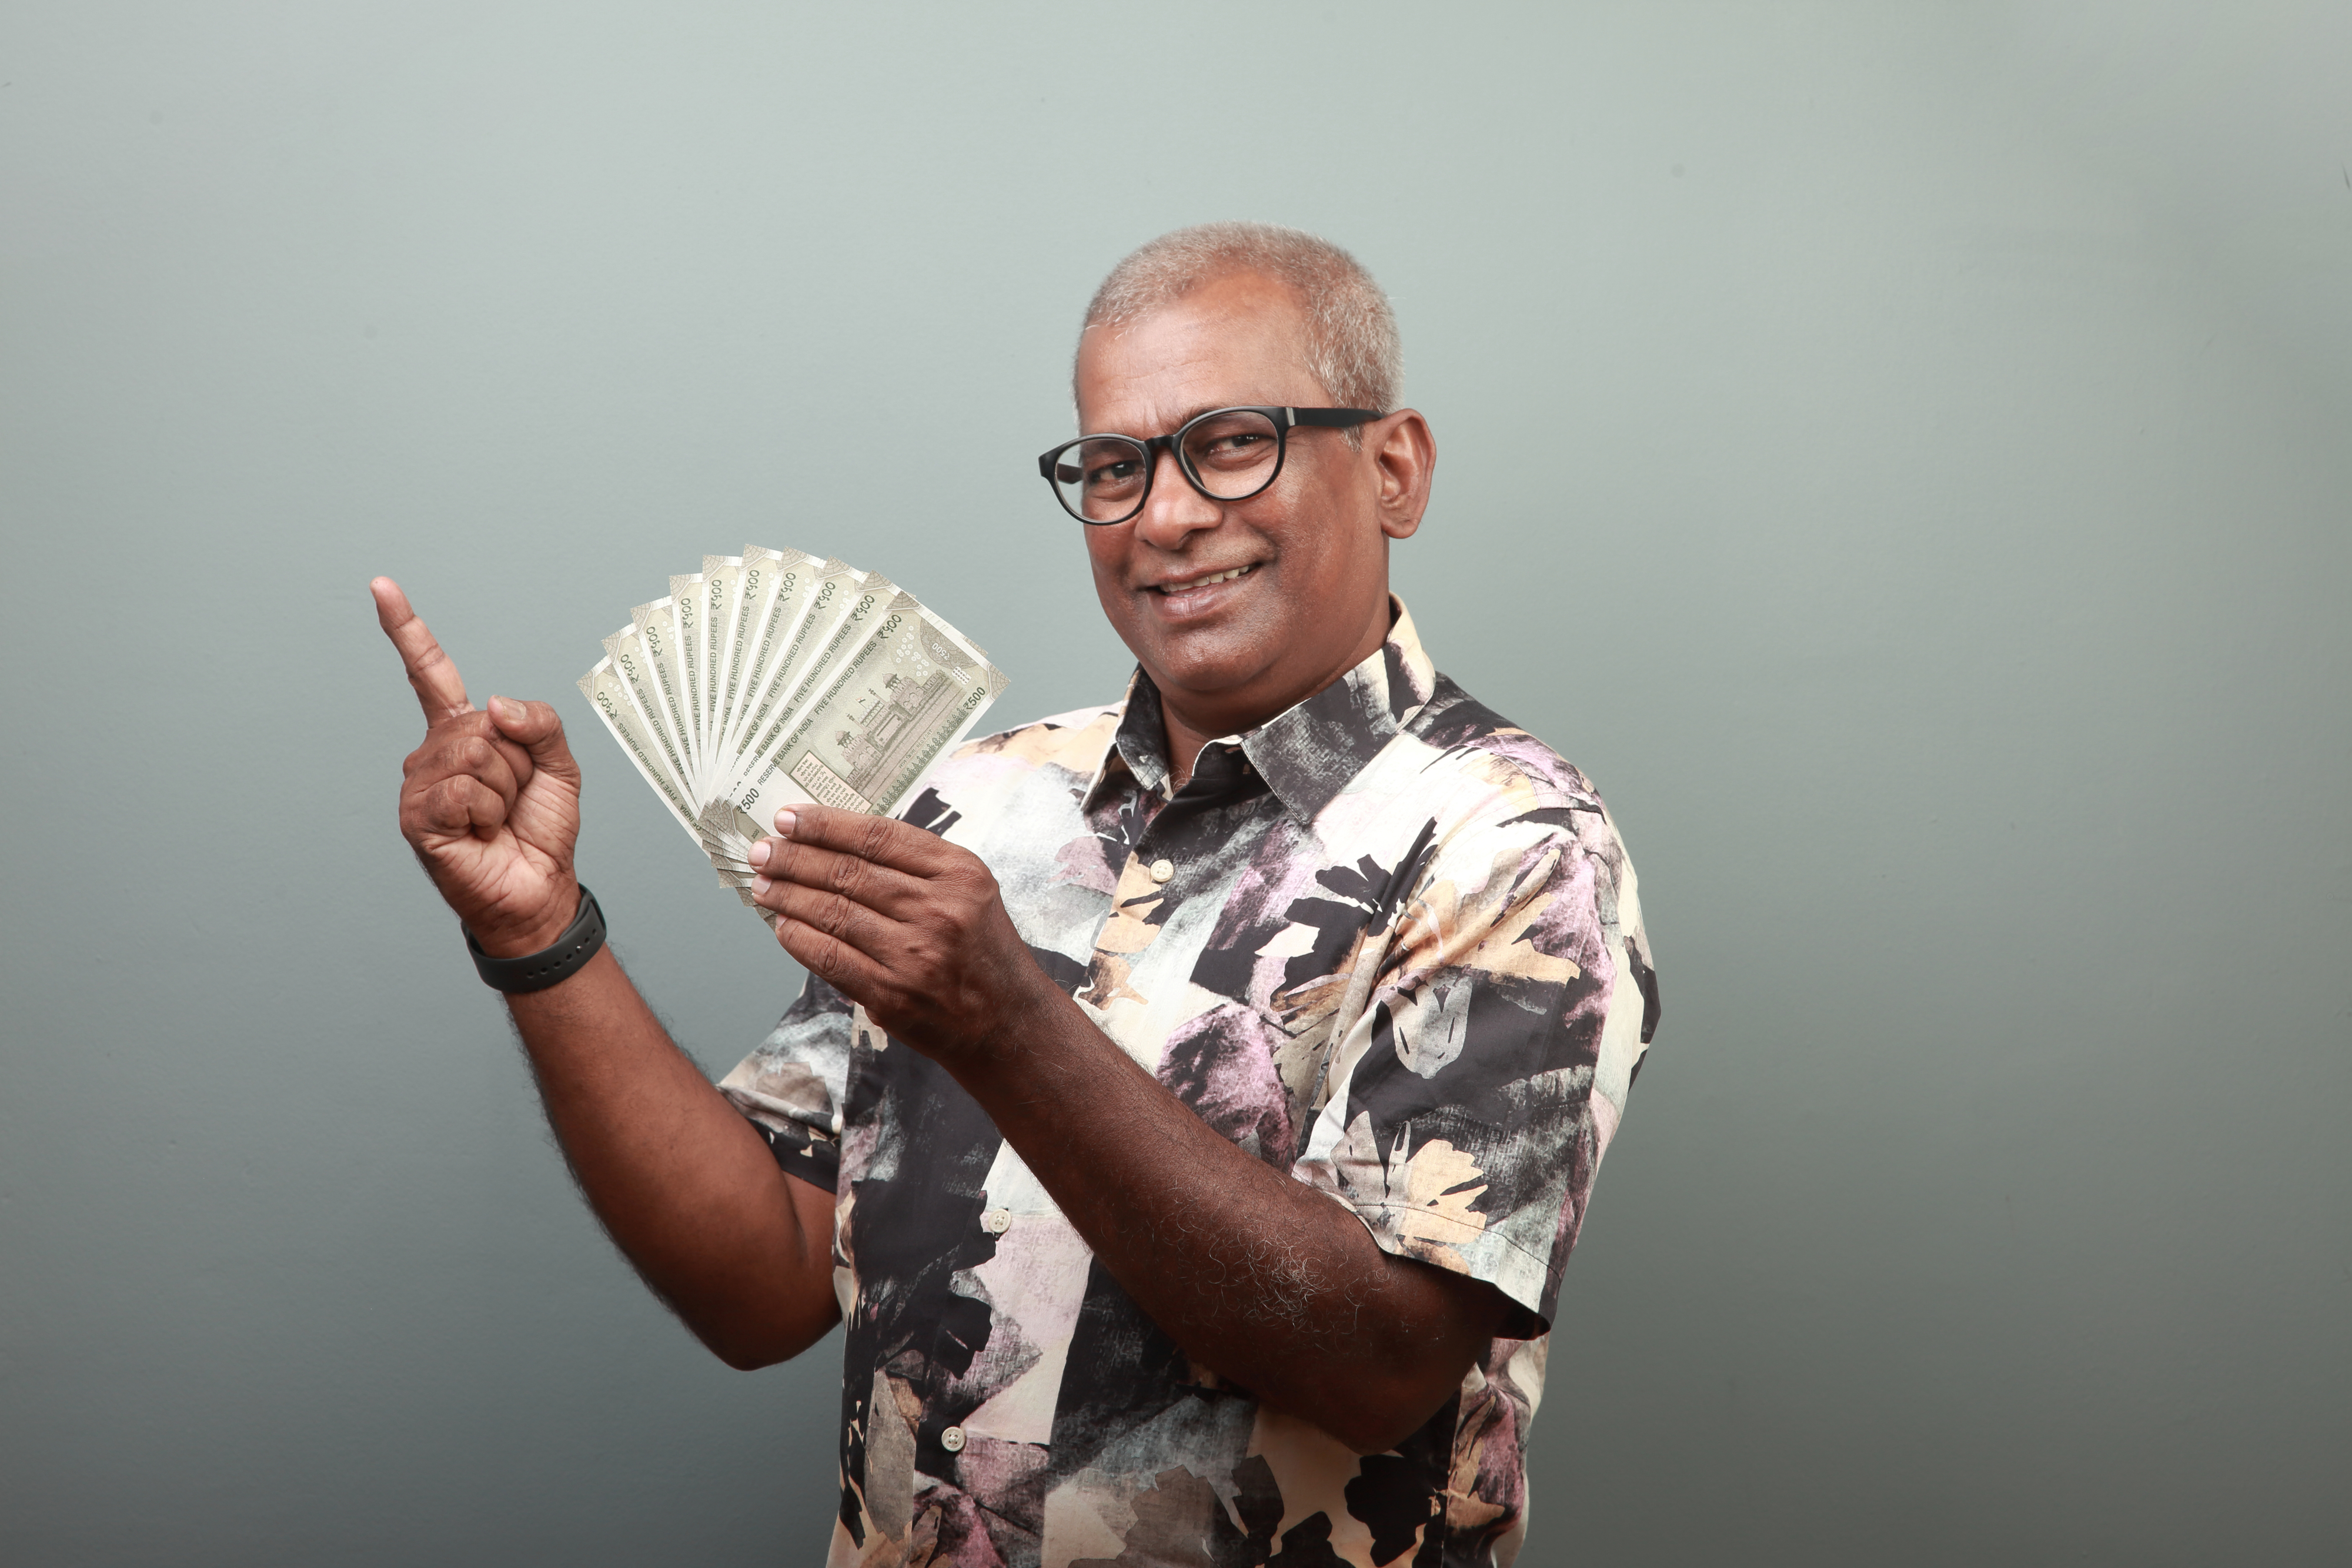 Man in a patterned shirt smiling and pointing to a fan of cash in his hand